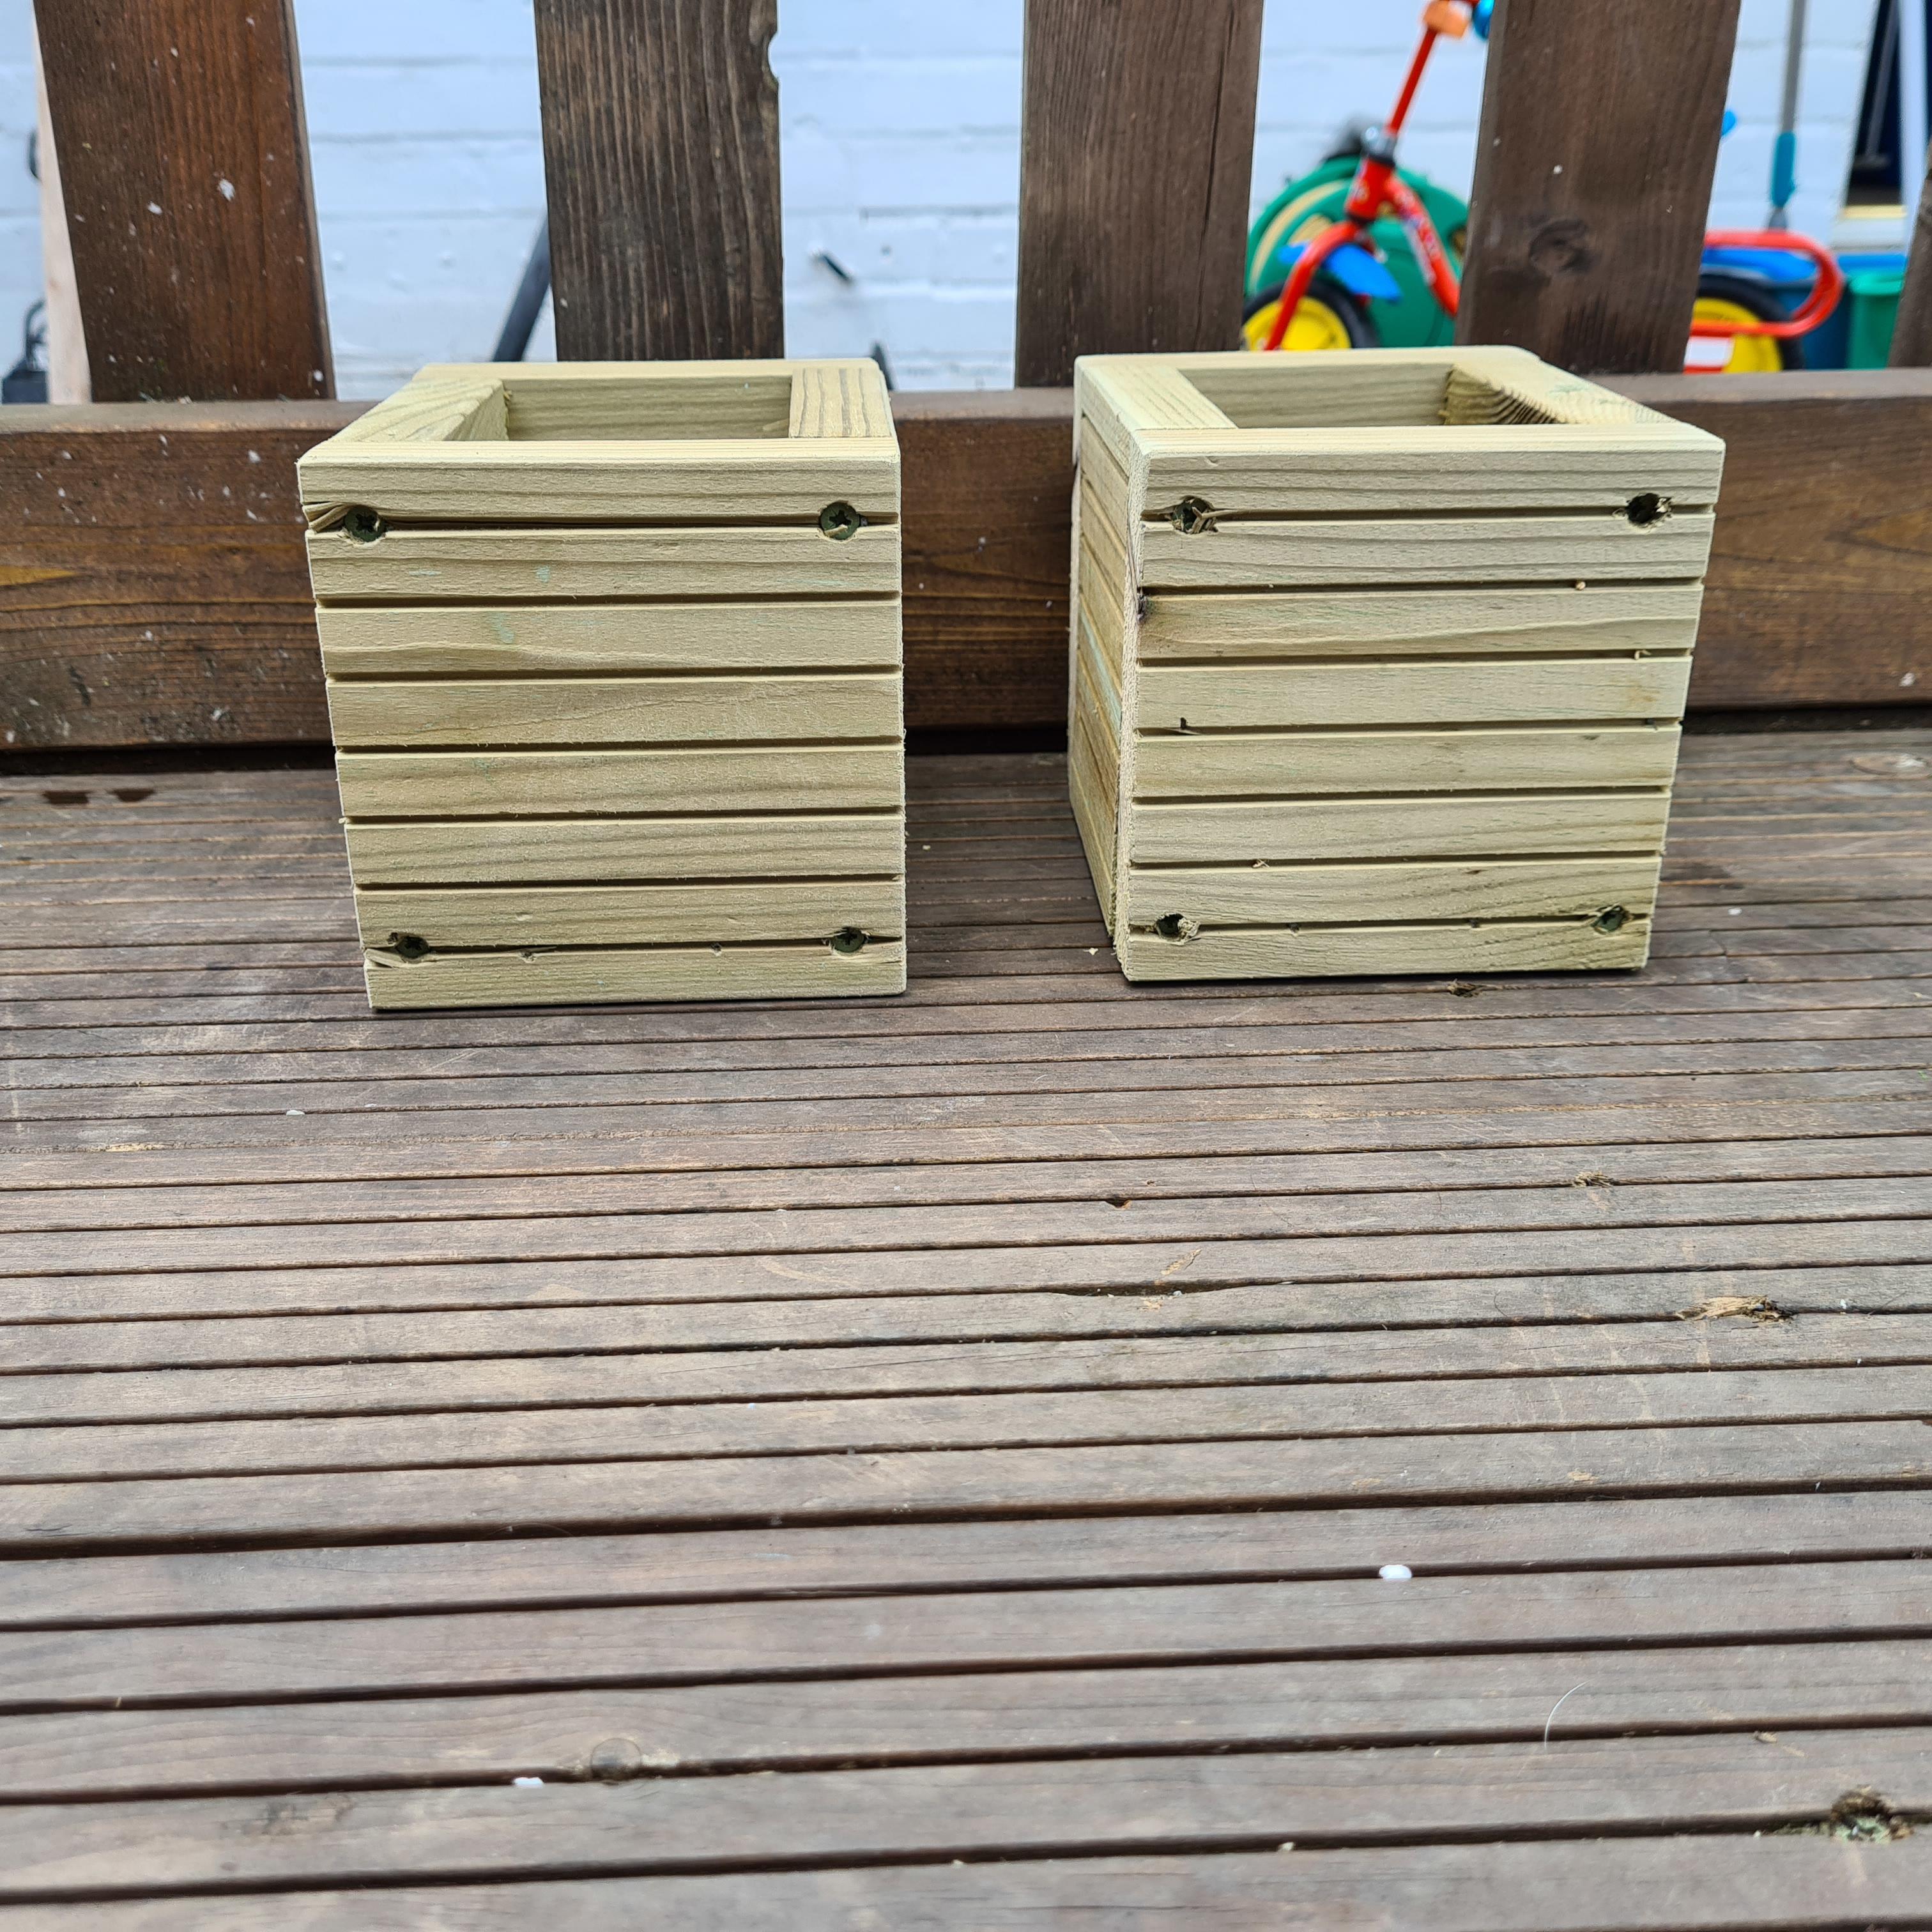 2 herb boxes on a deck area